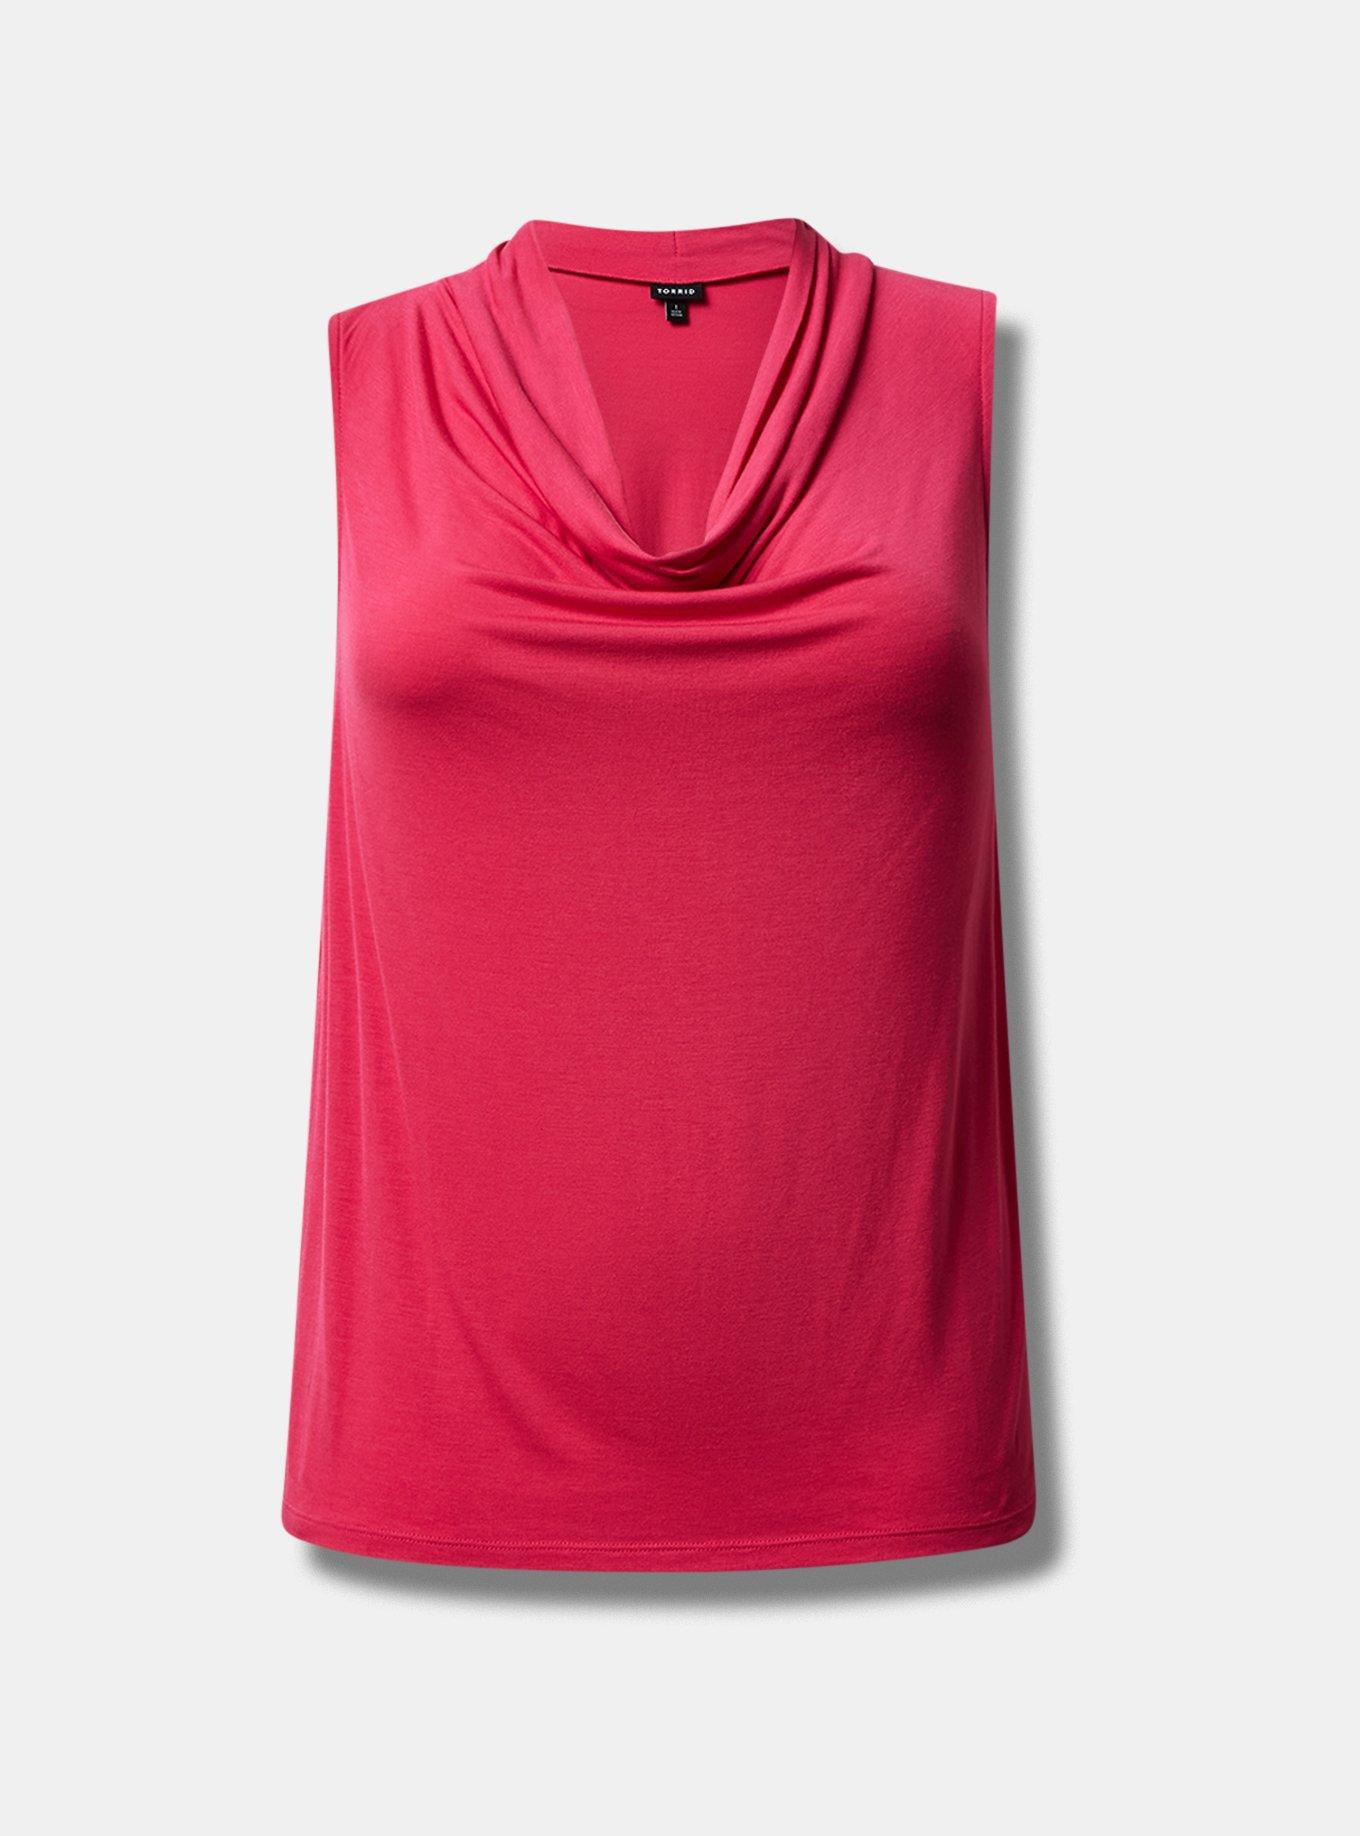 Tunic cami jersey - Republique Collection